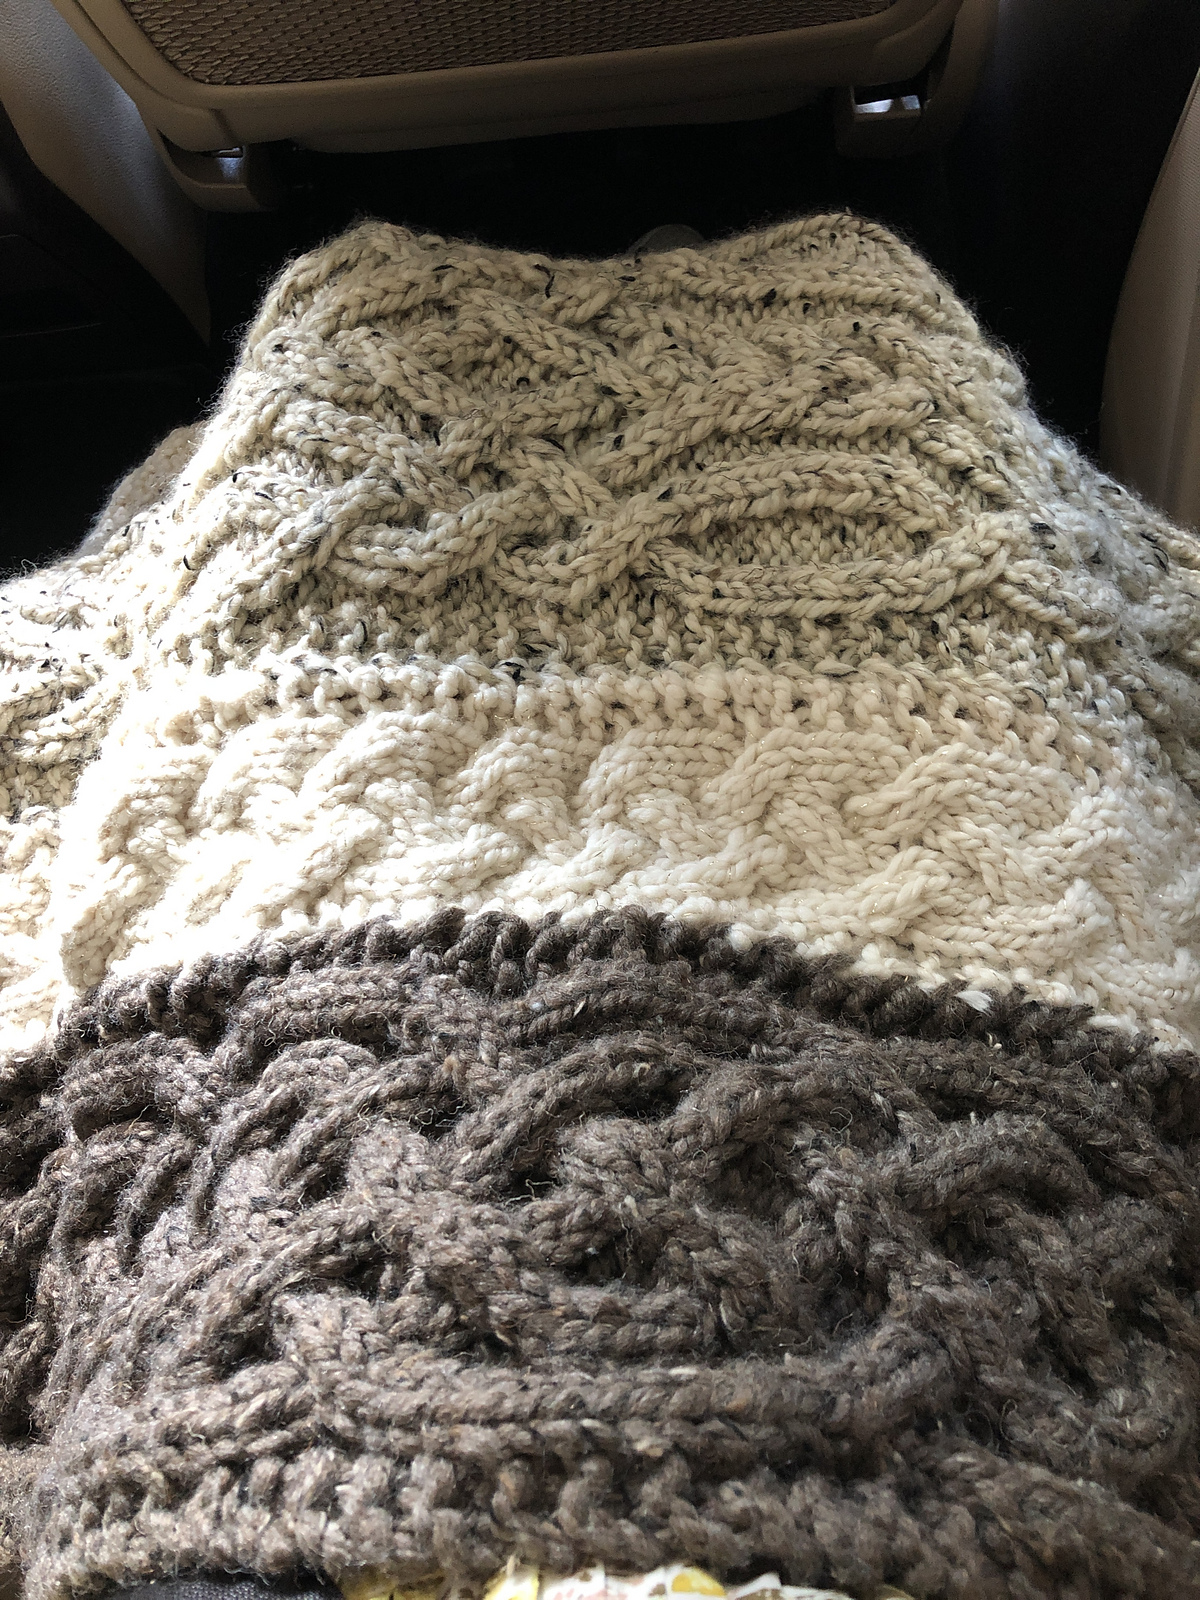 A lap blanket for my dad's birthday made by sewing together several strips of knitted Celtic cables (it is only half-done in this photo, oops!).